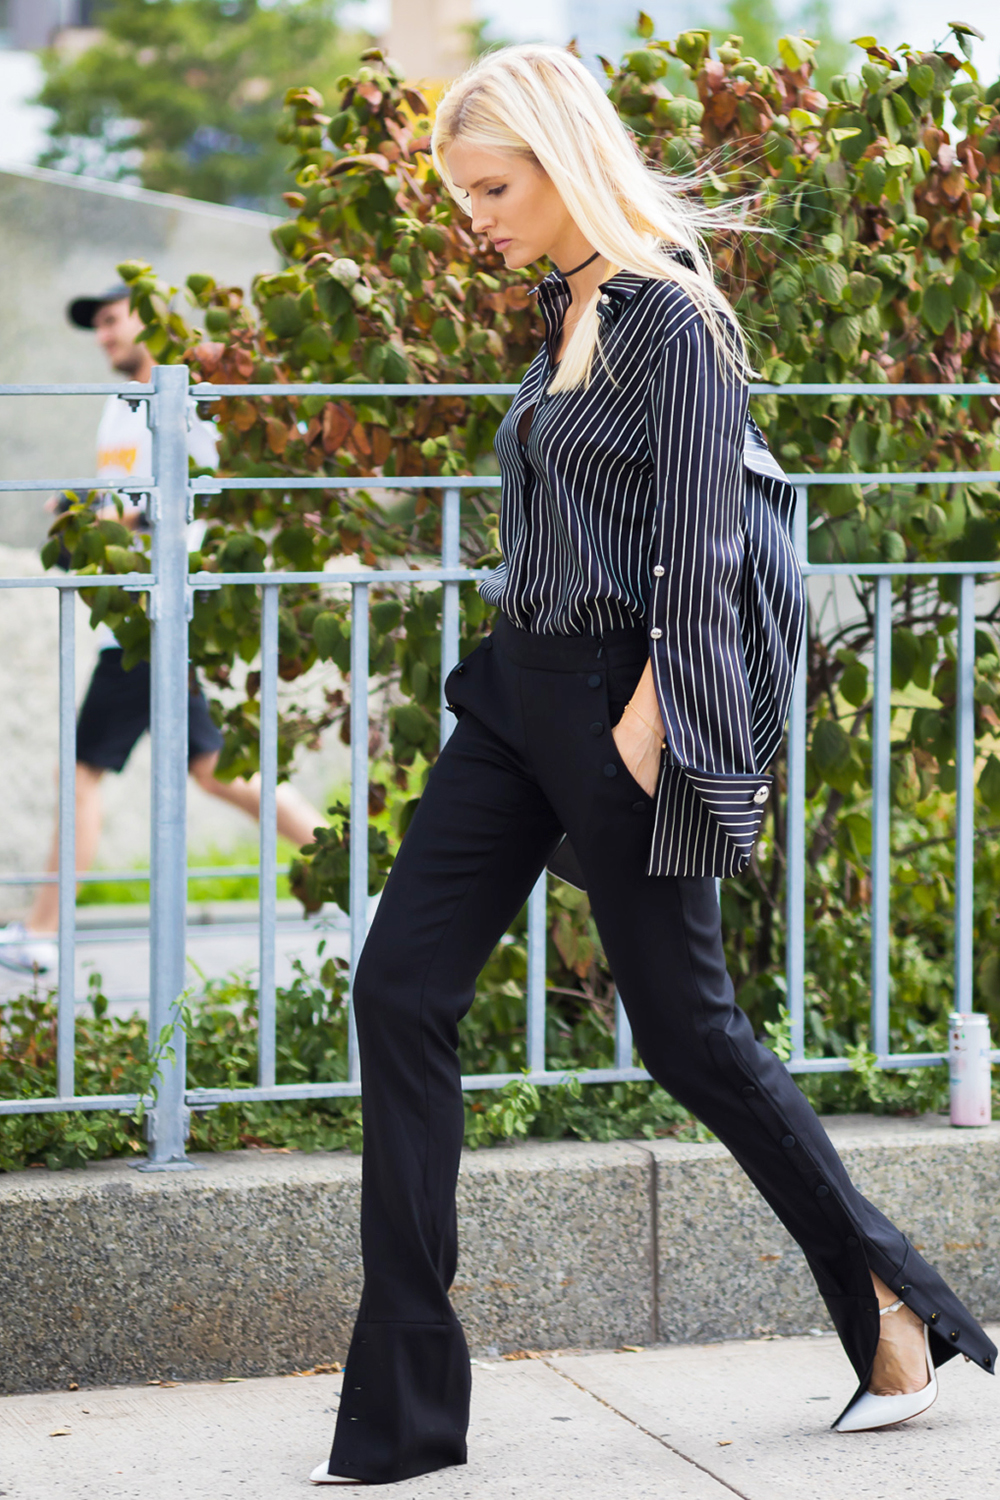 Get Inspired With Our Roundup of All-Black Work Outfits | Who What Wear